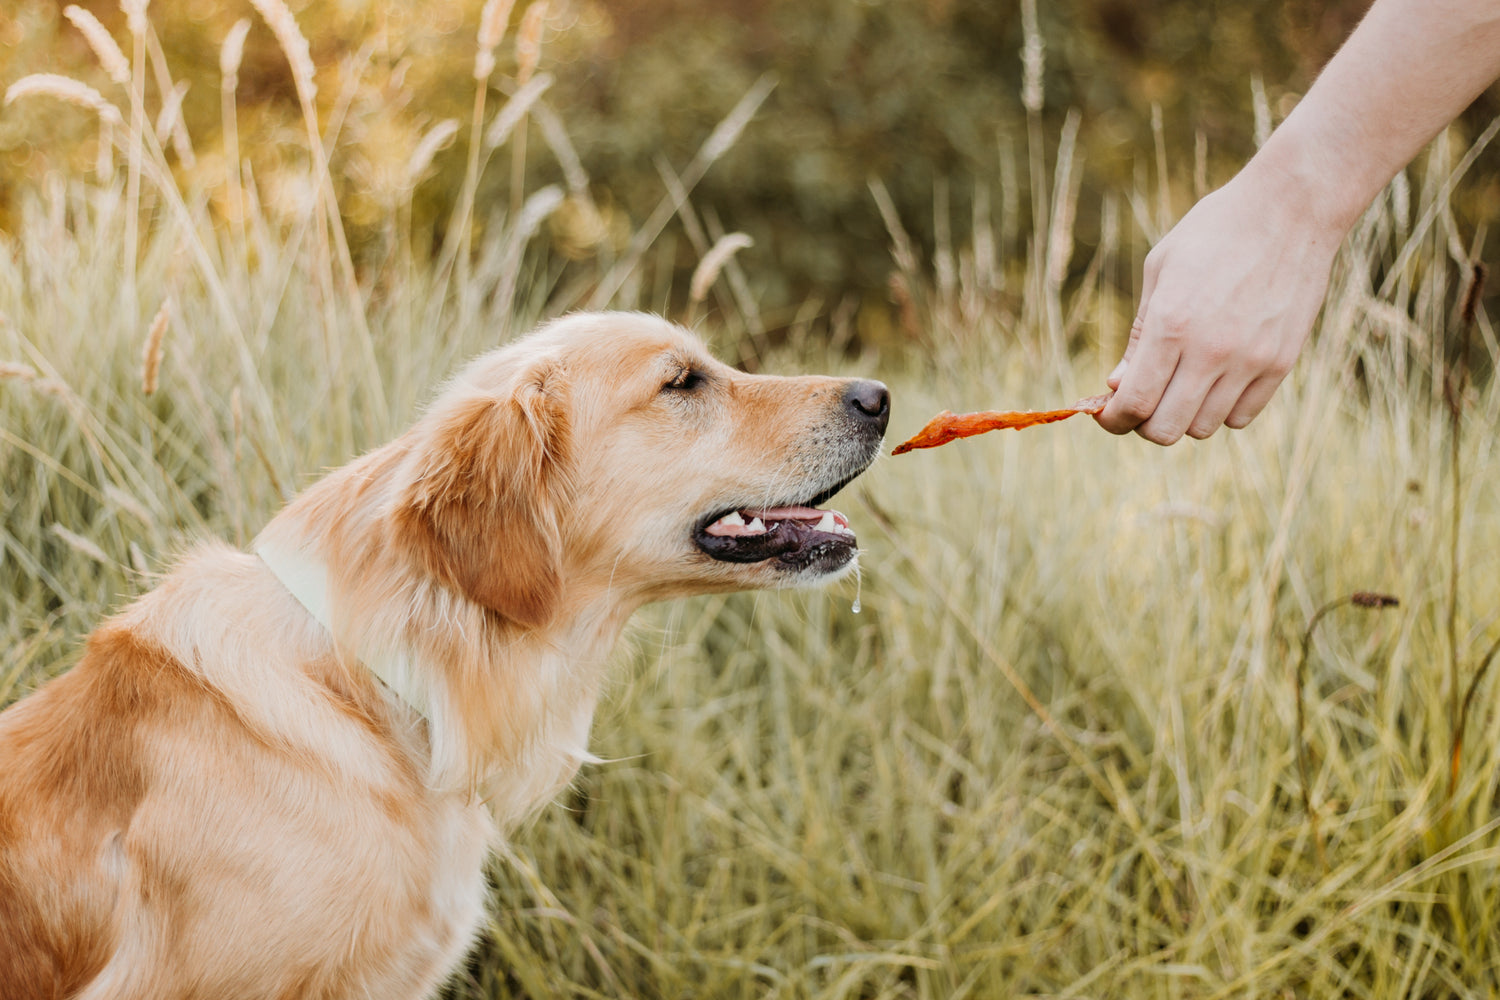 The Benefits of Feeding Your Dog Treats Without Preservatives